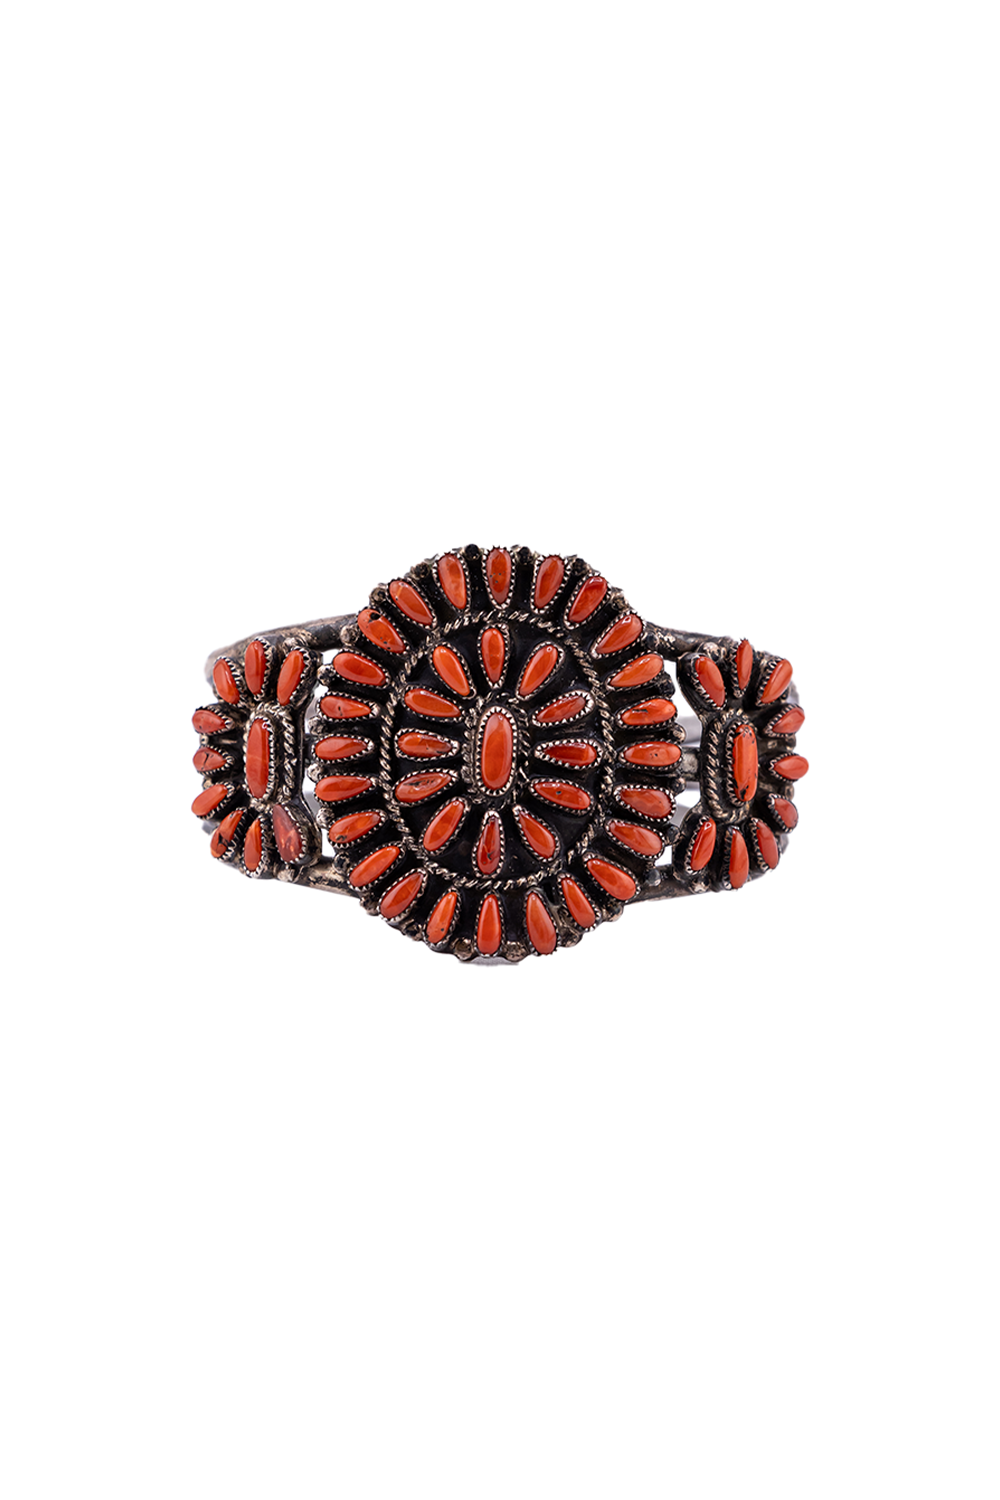 Vintage VMB Signed Coral Cuff